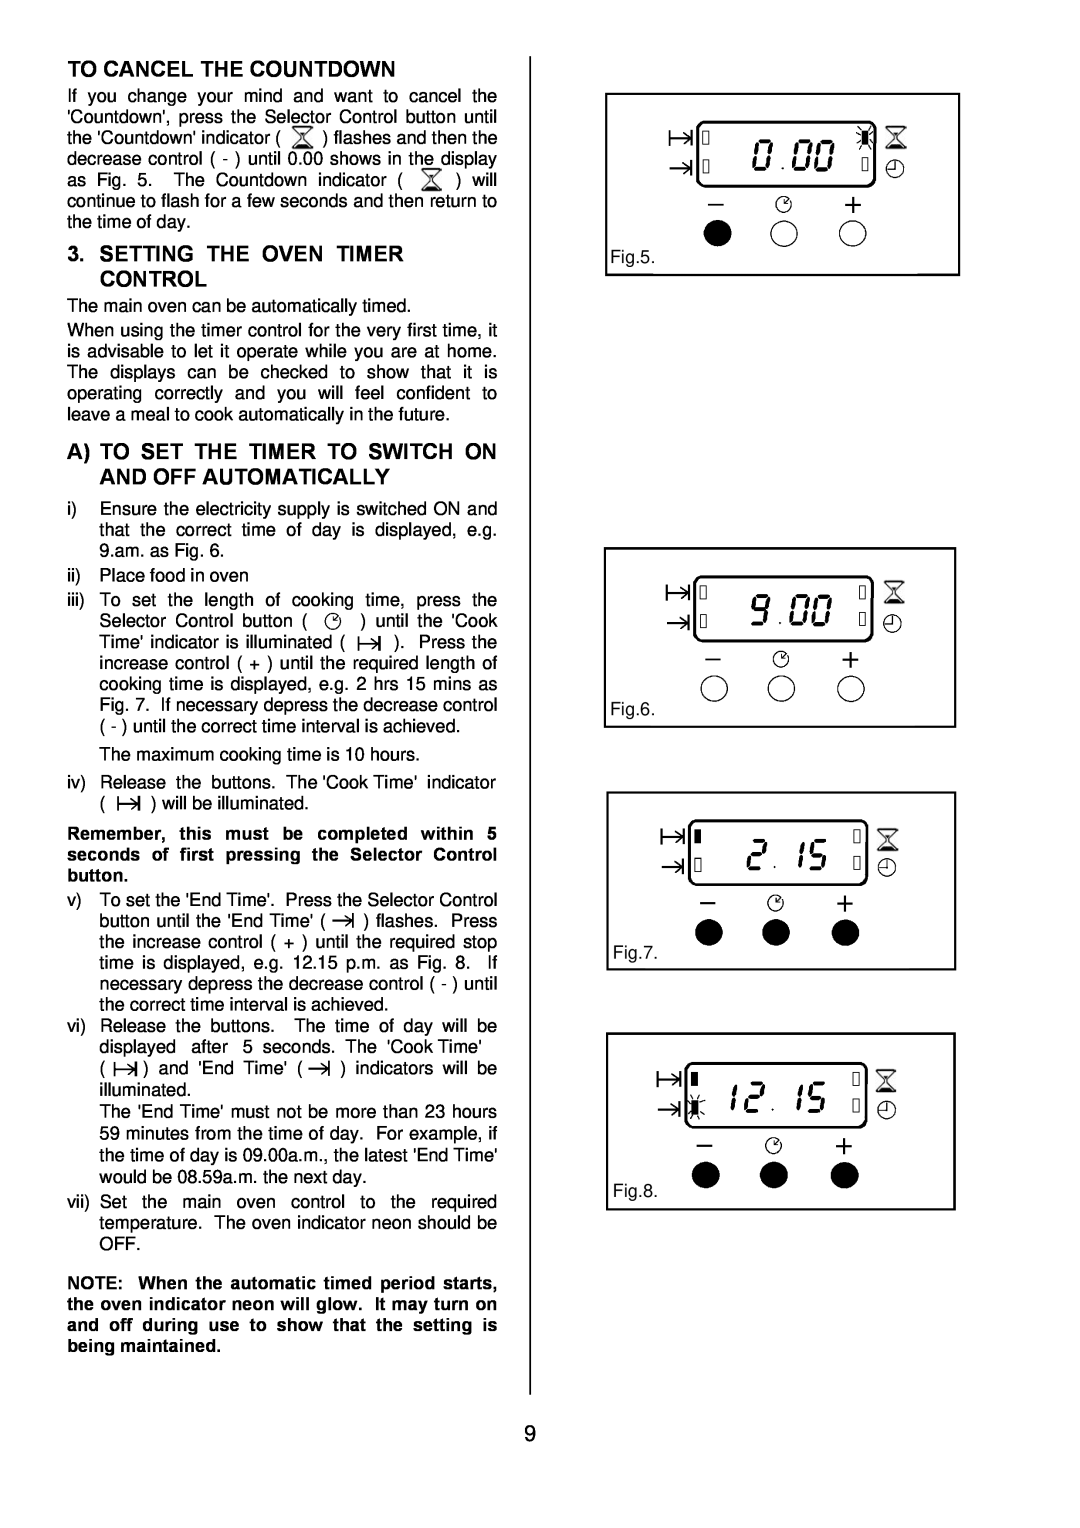 Zanussi ZOD 330 manual To Cancel The Countdown, Setting The Oven Timer Control 